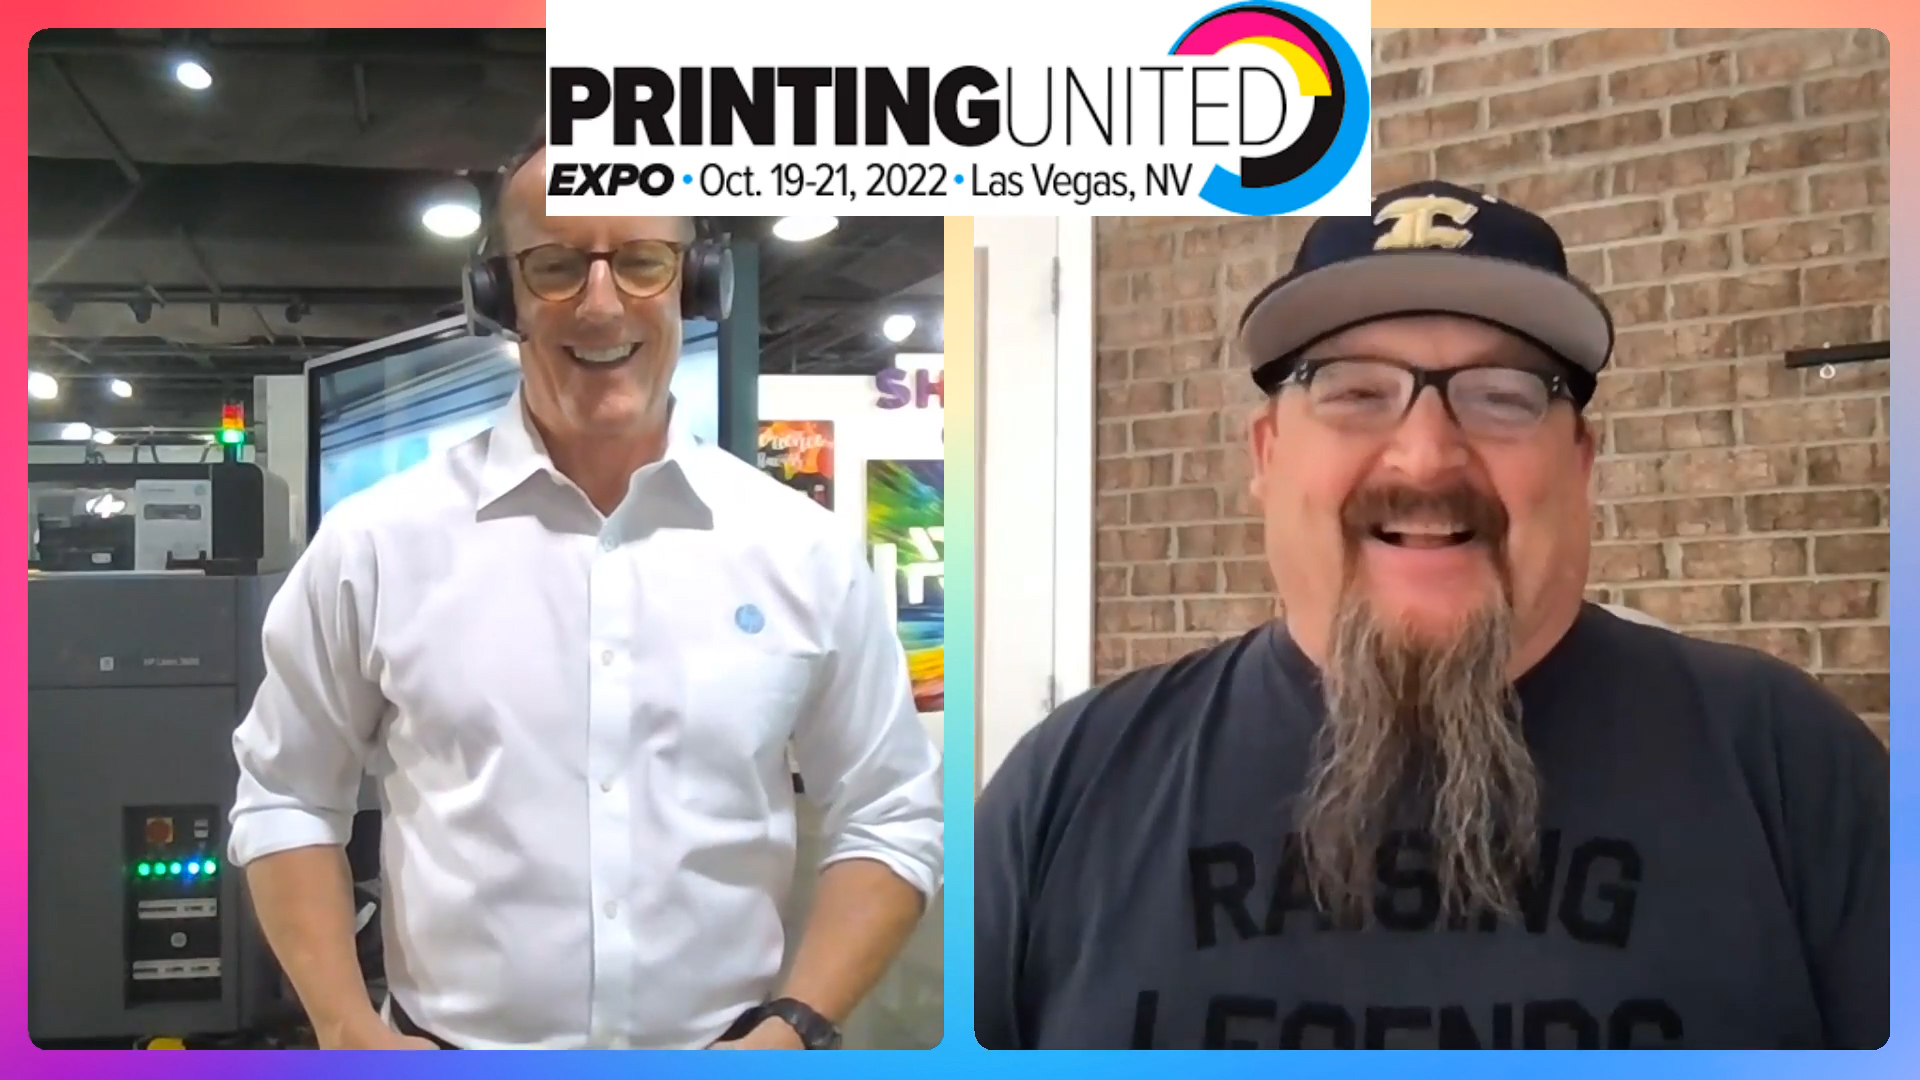 HP's Tom Wittenberg Previews PRINTING United Expo 2022